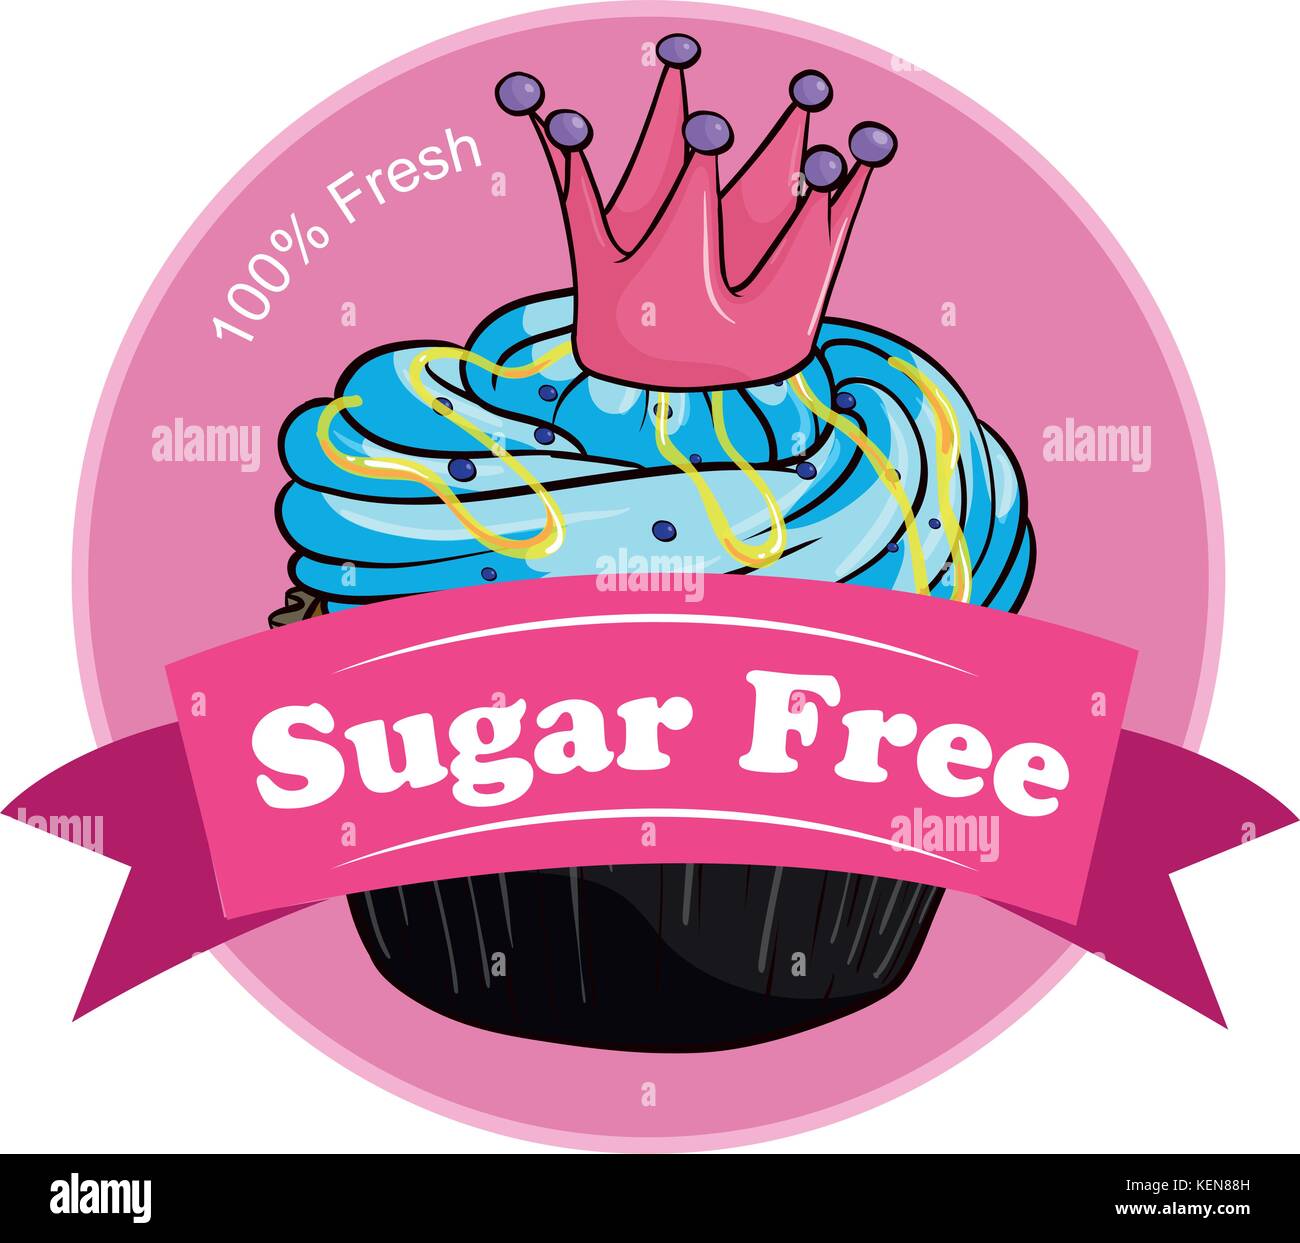 Illustration of a pink sugar free label on a white background Stock Vector